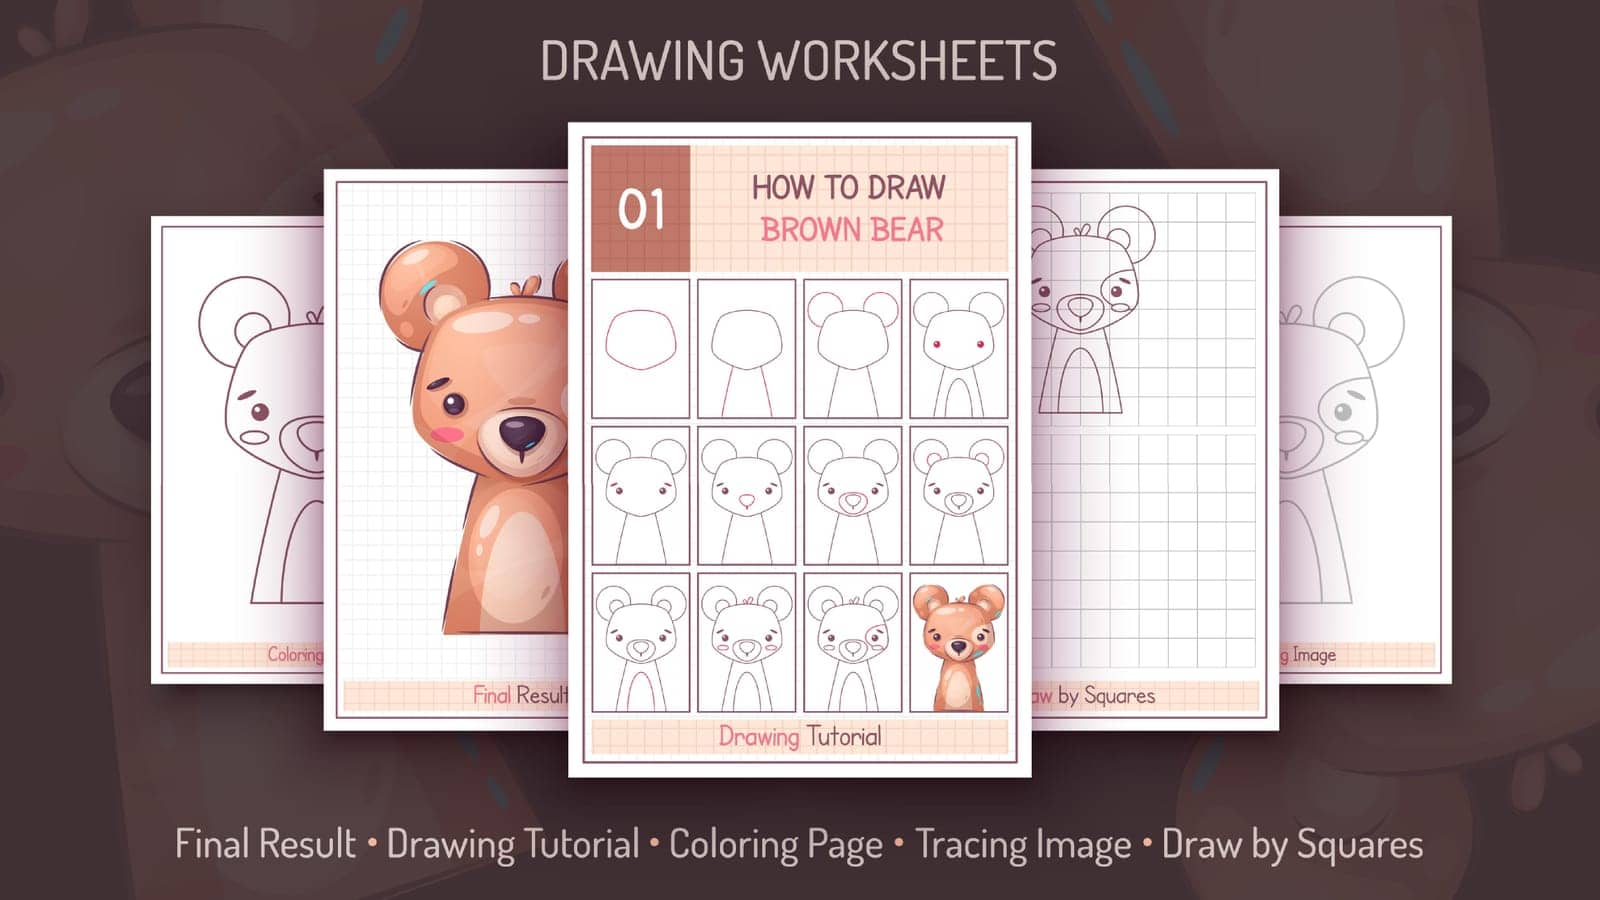 How to Draw a Brown Bear. Step by Step Drawing Tutorial. Draw Guide. Simple Instruction. Coloring Page. Worksheets for Kids and Adults. by rwgusev